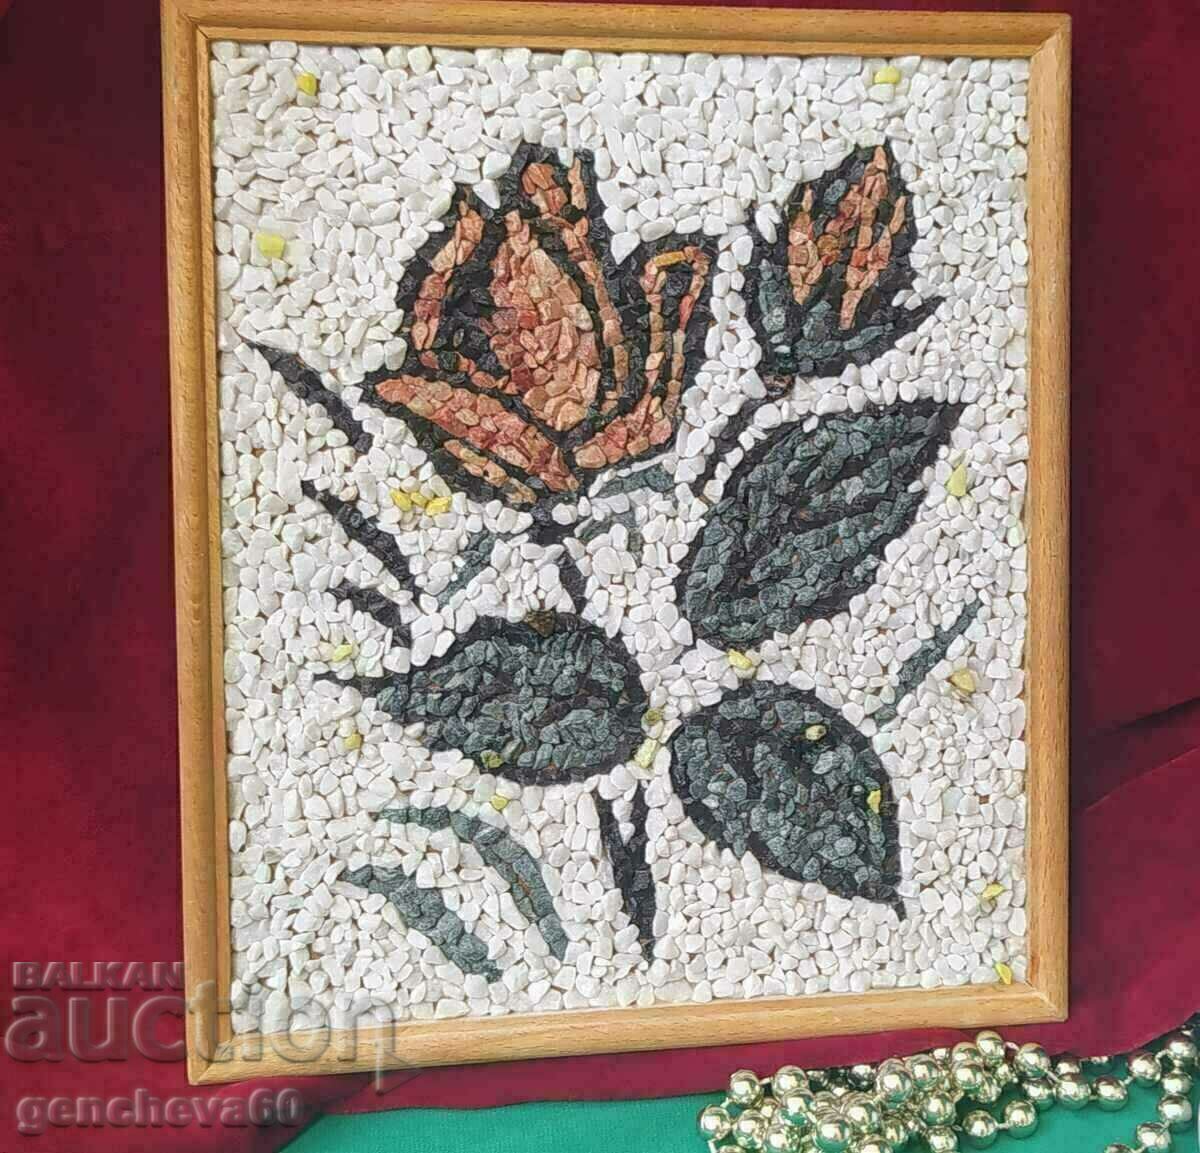 Author's painting "Rose" mosaic of natural stones